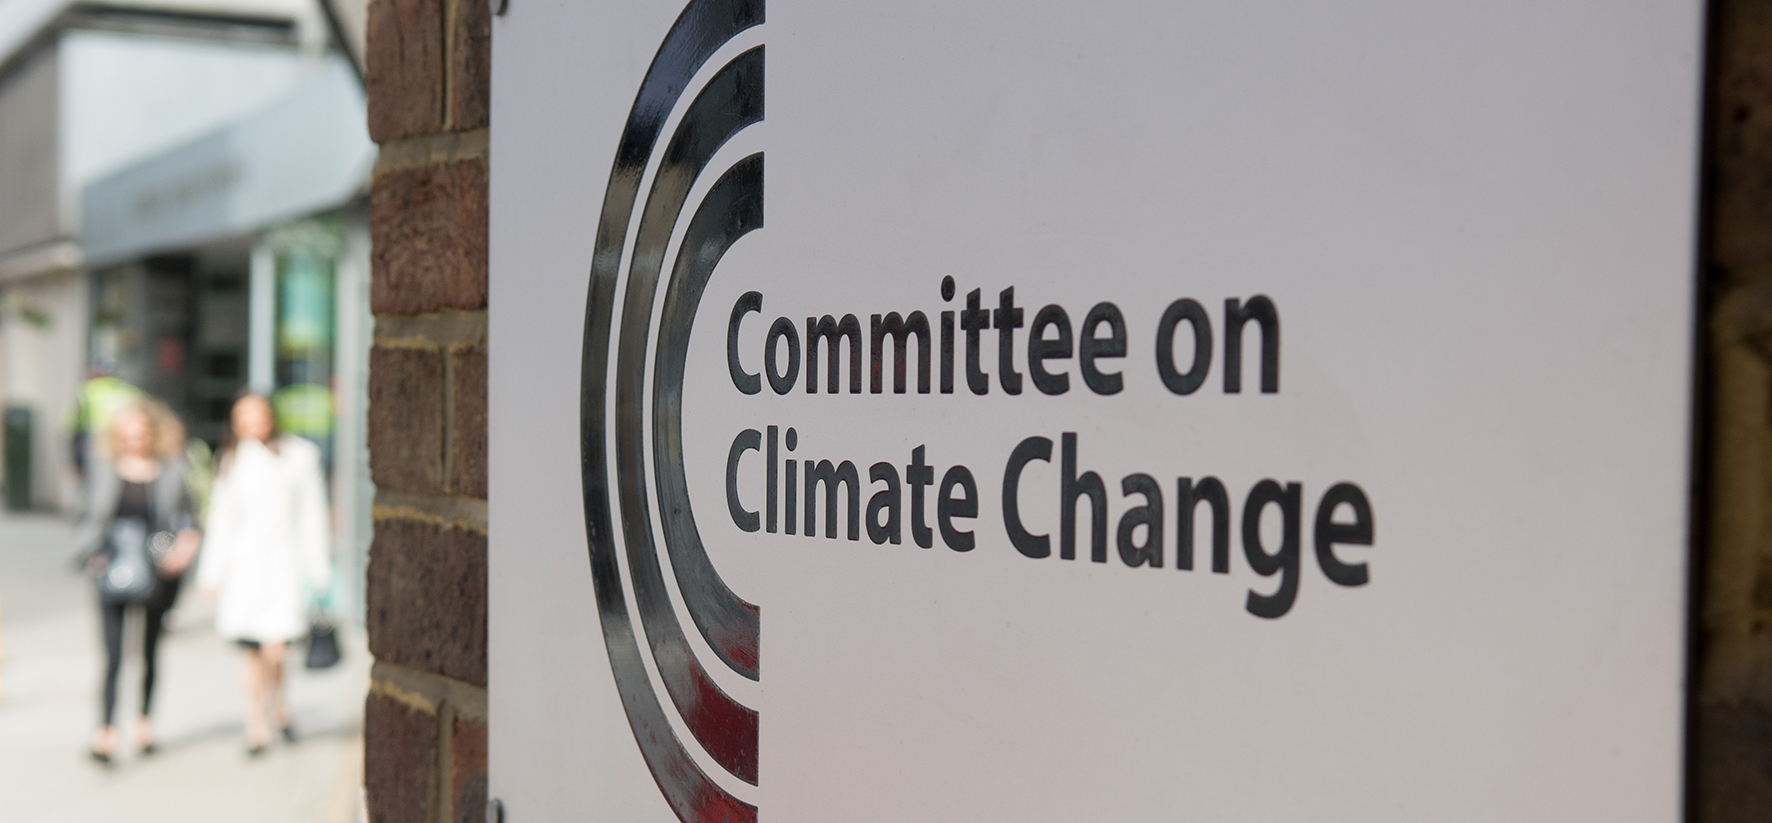 The UK Not Ready To Handle The Climate Crisis Claims Climate Change Committee